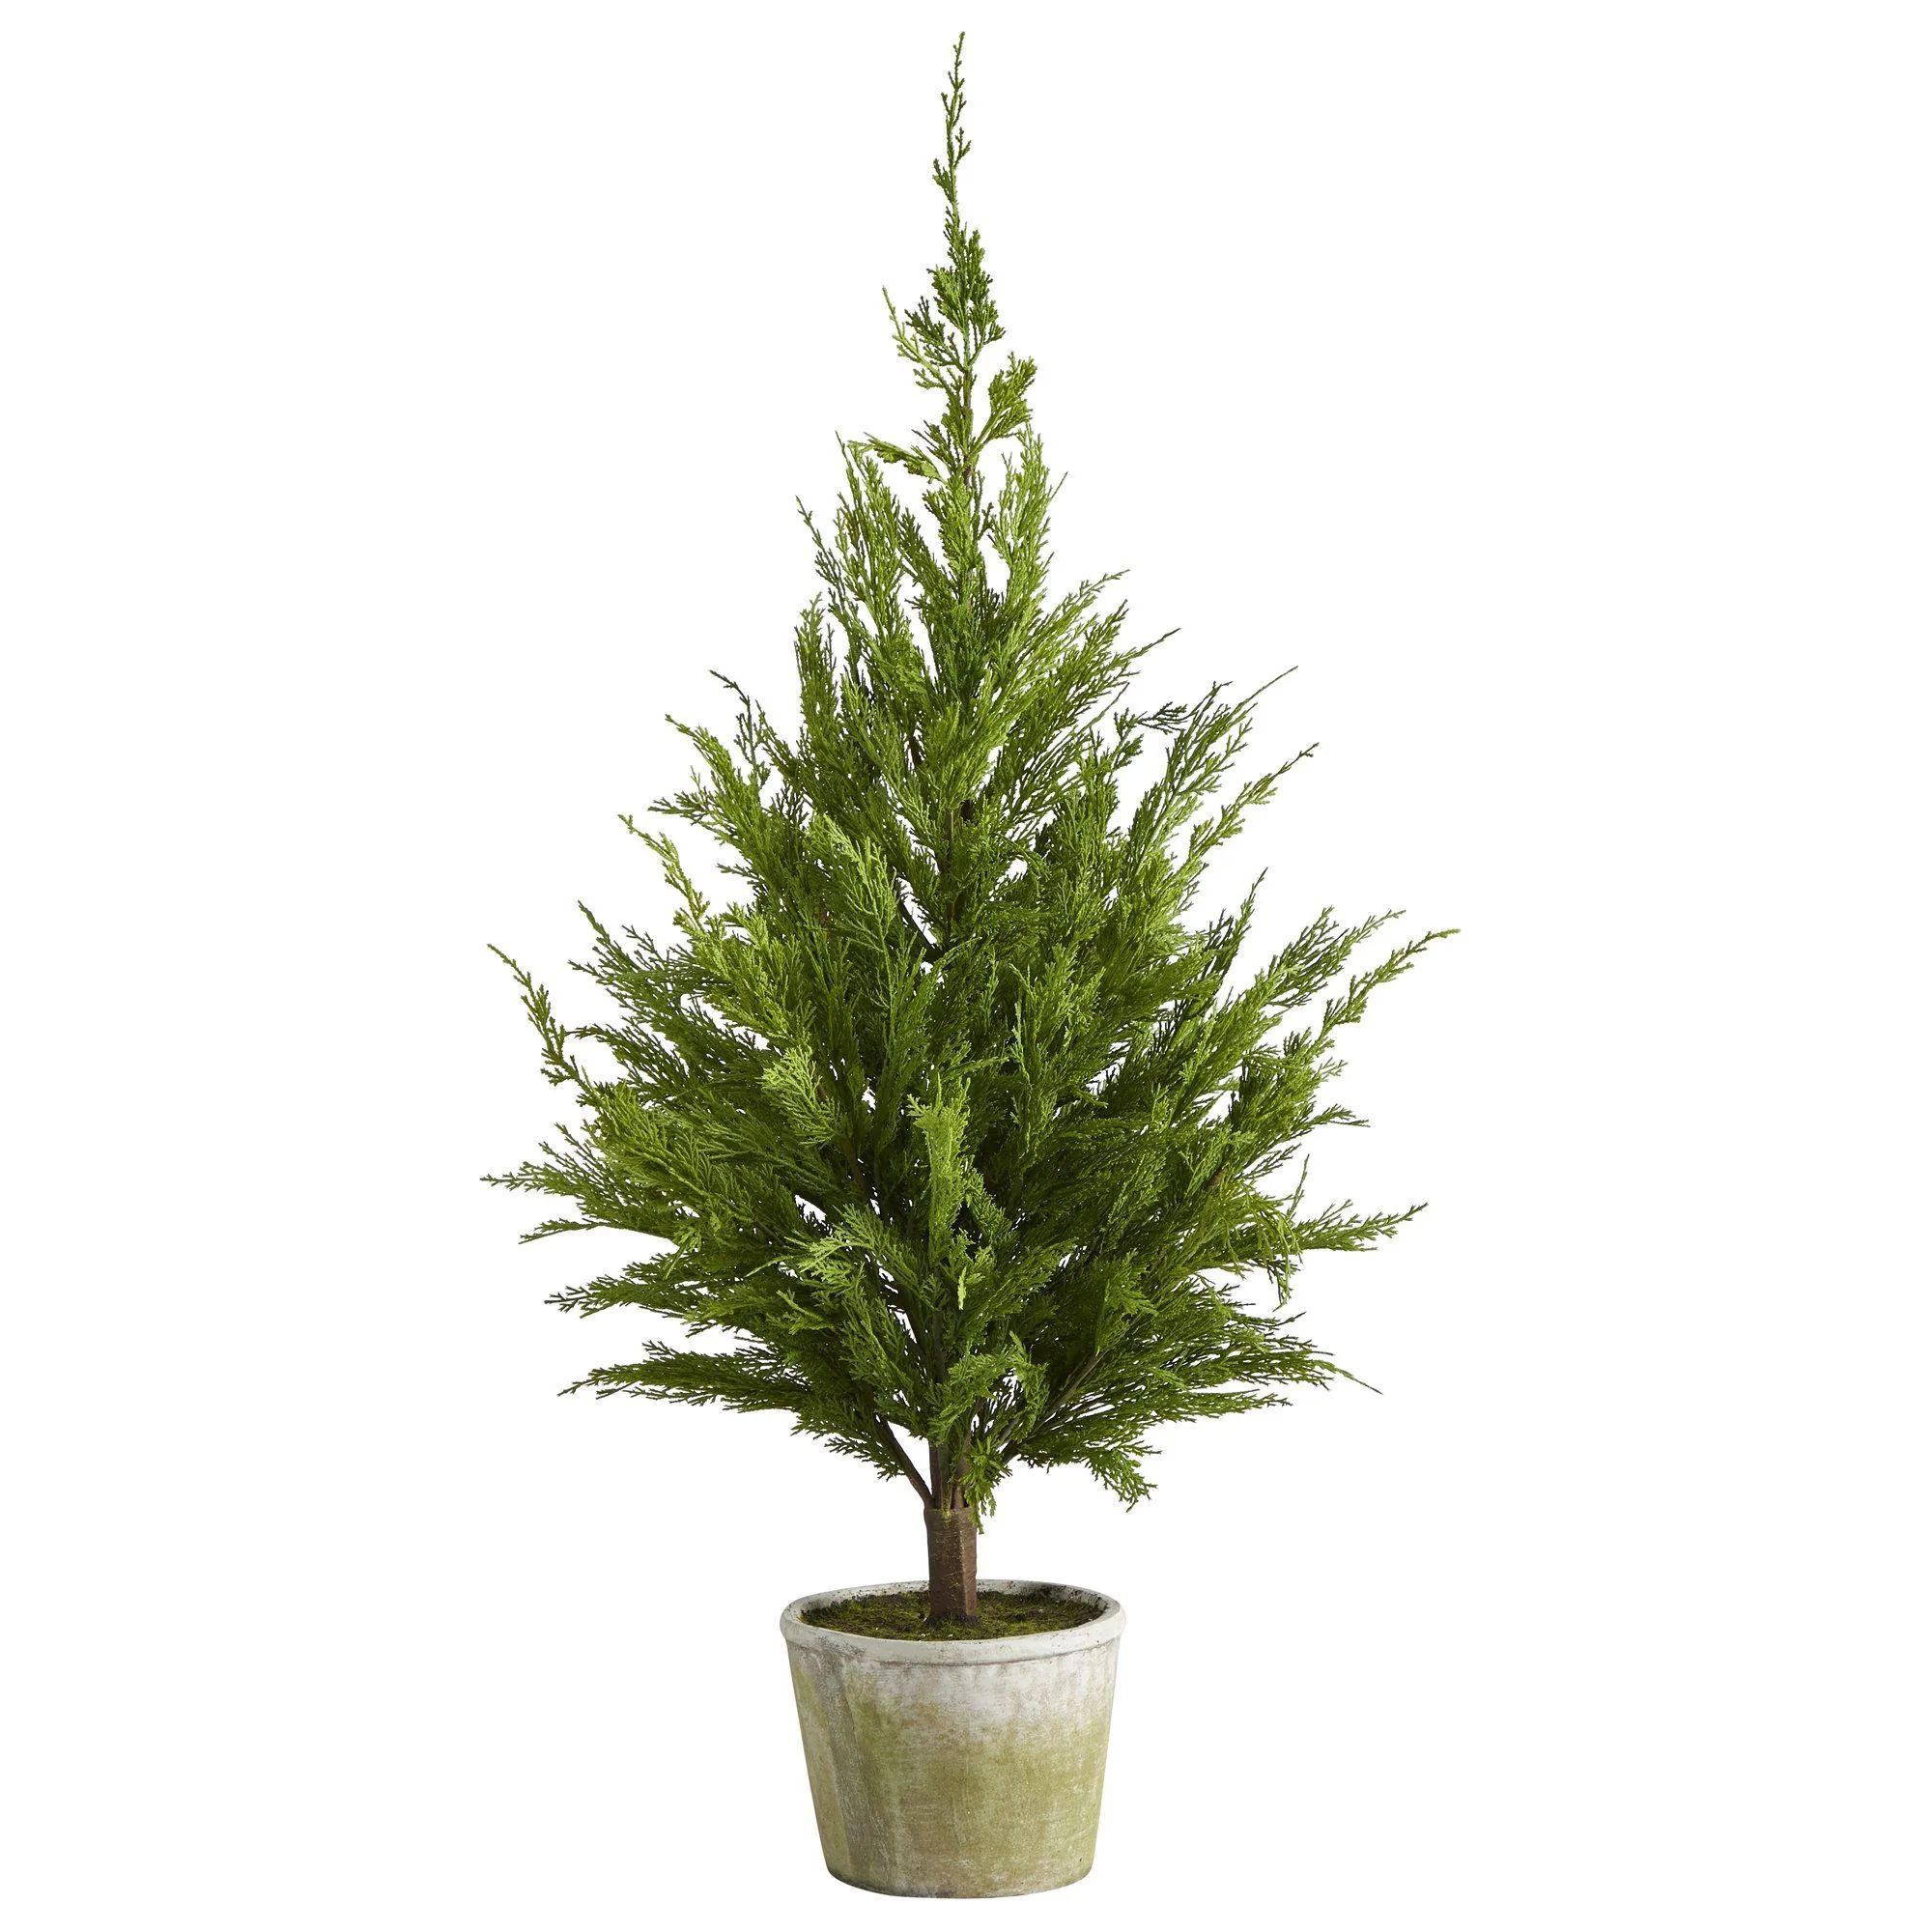 3.5’ Cedar Pine “Natural Look” Artificial Tree in Decorative Planter | Nearly Natural